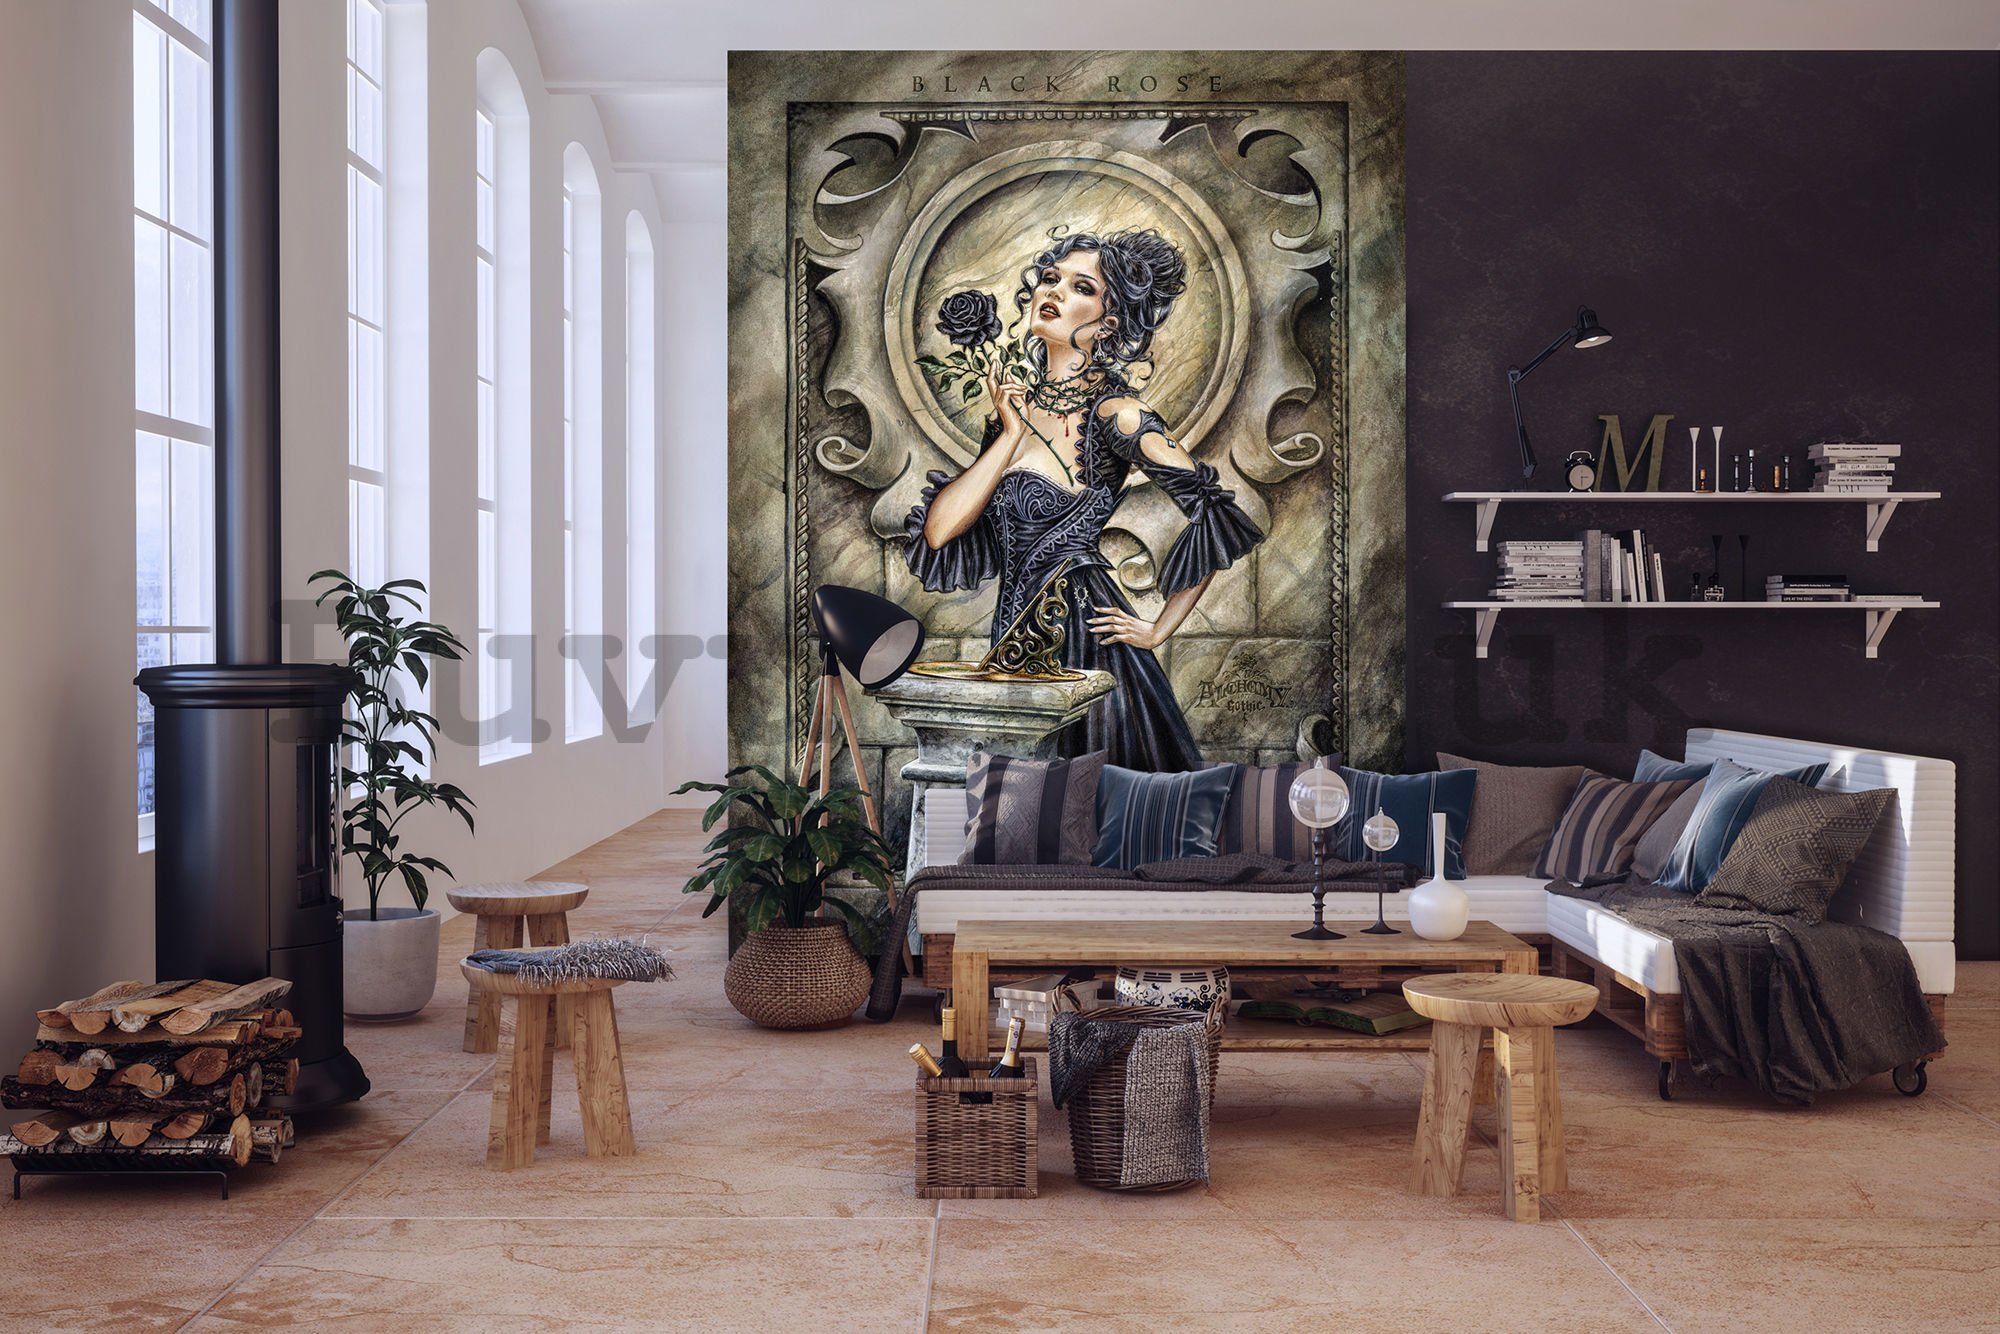 Wall mural: Woman with roses - 254x184 cm